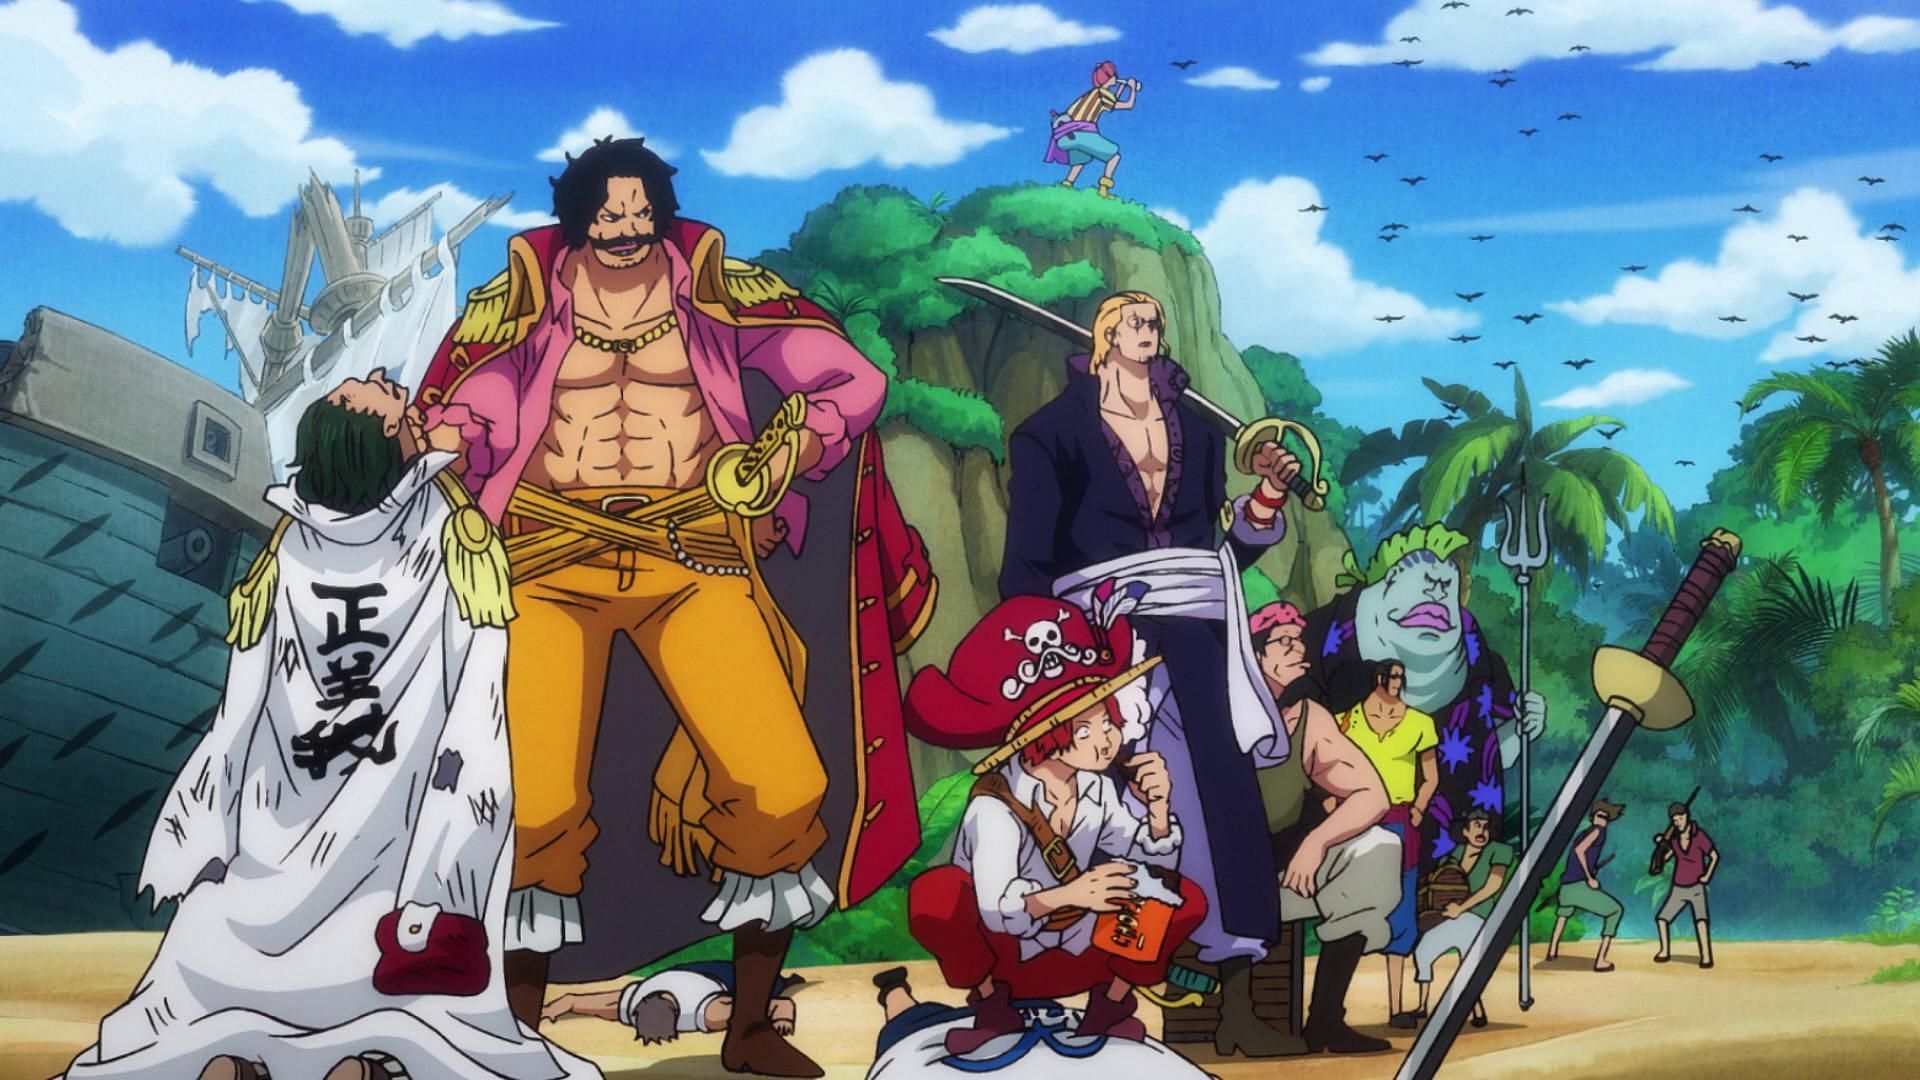 The Roger Pirates (Image via Toei Animation, One Piece)